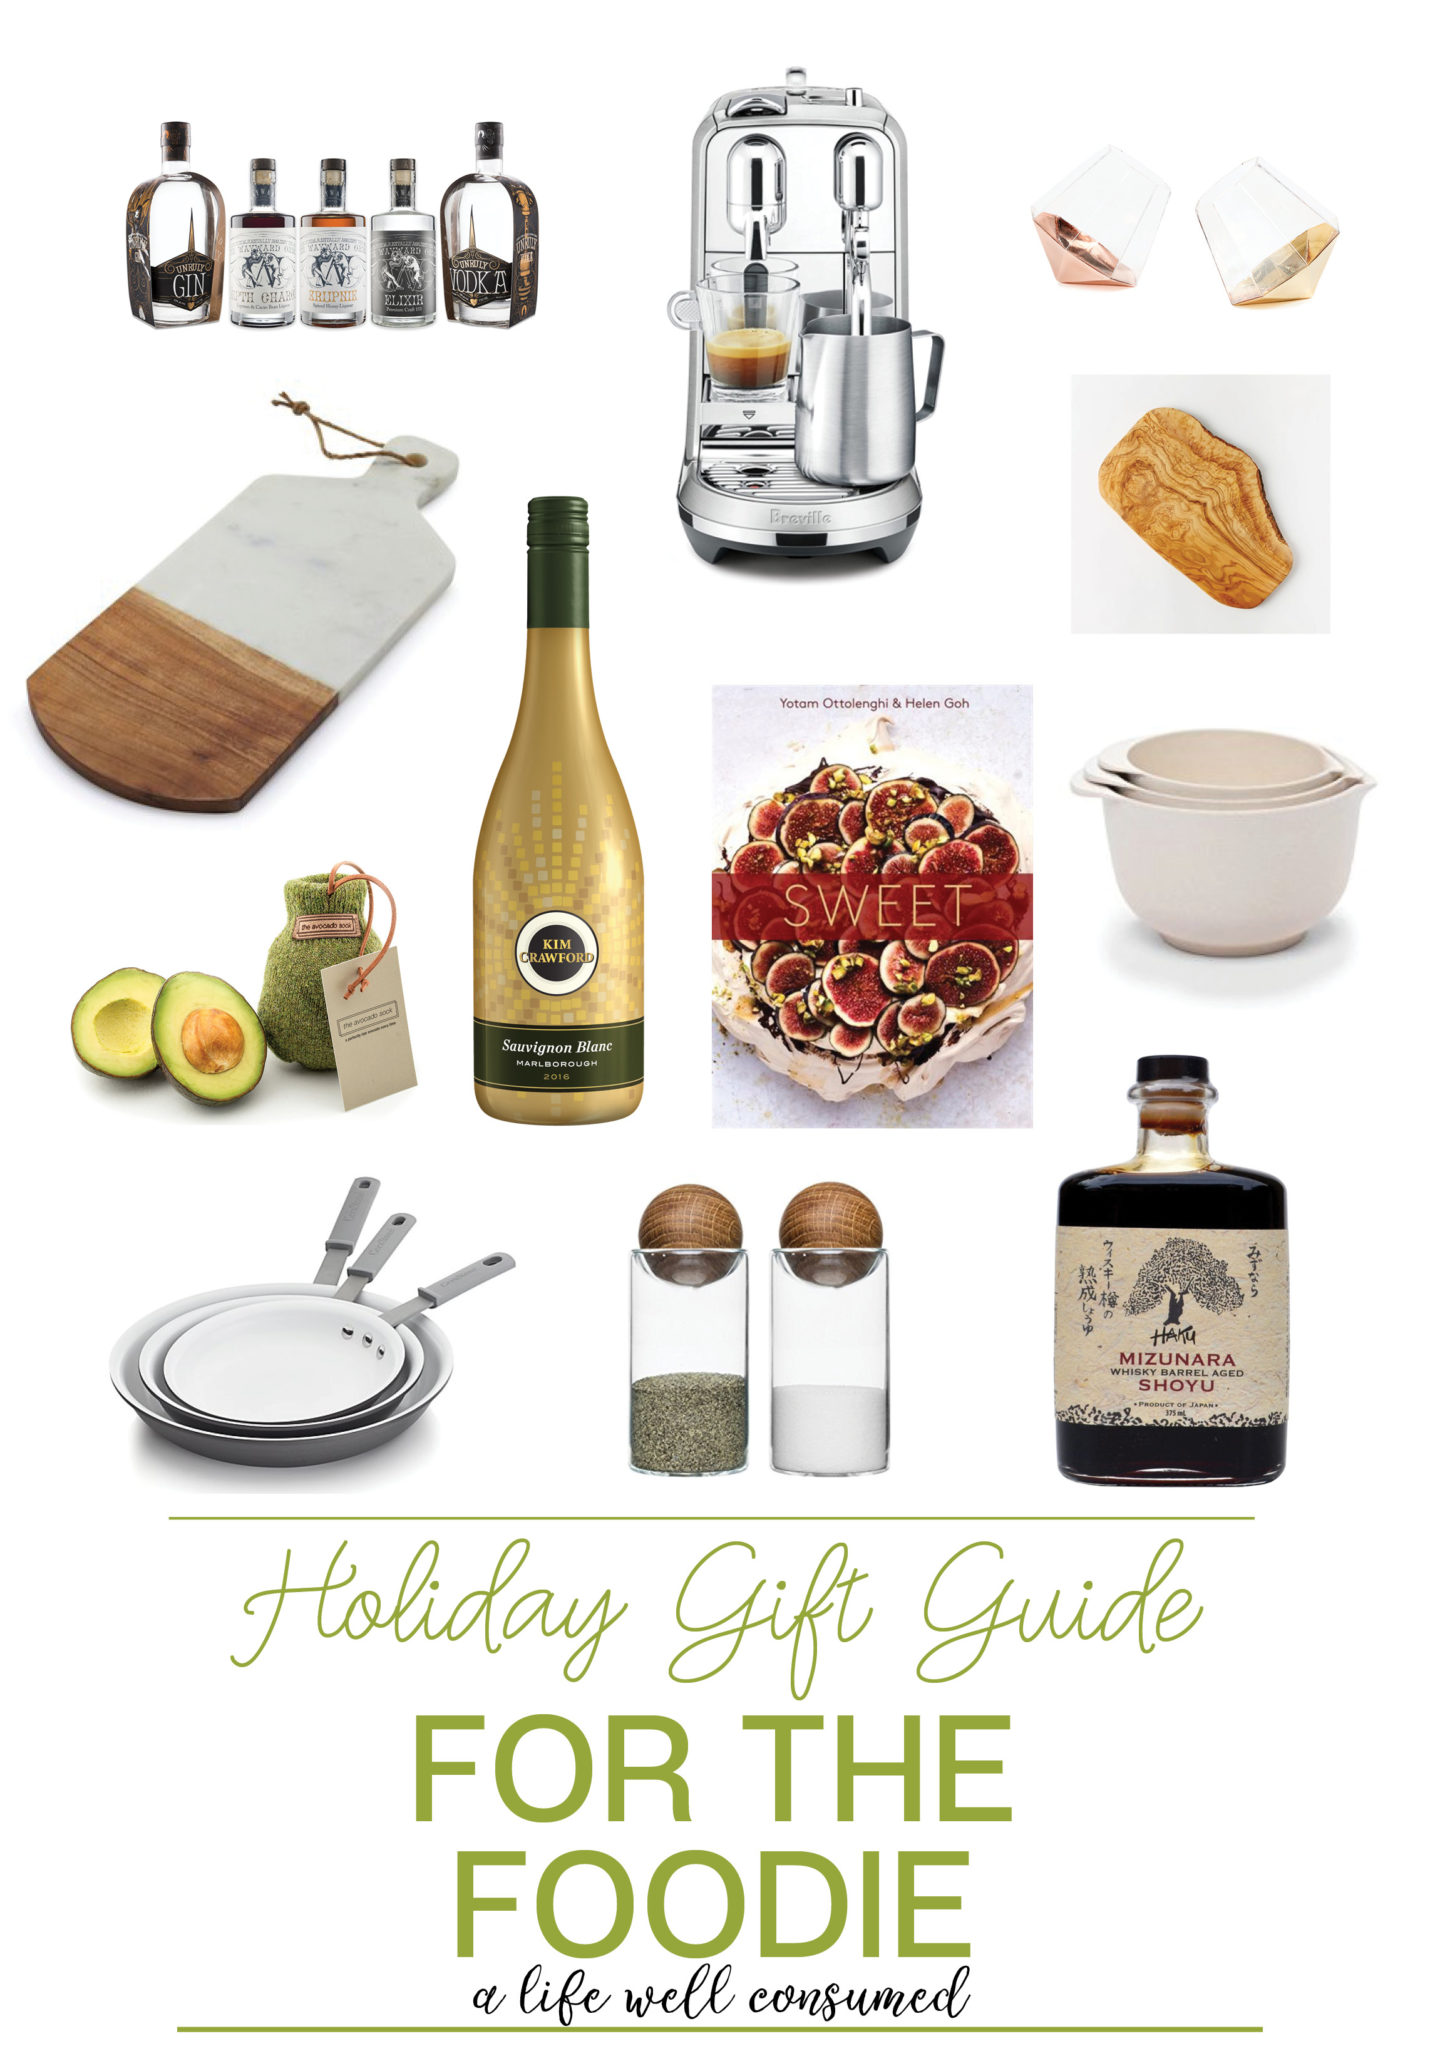 Holiday Gift Guide 2017 For the Foodie